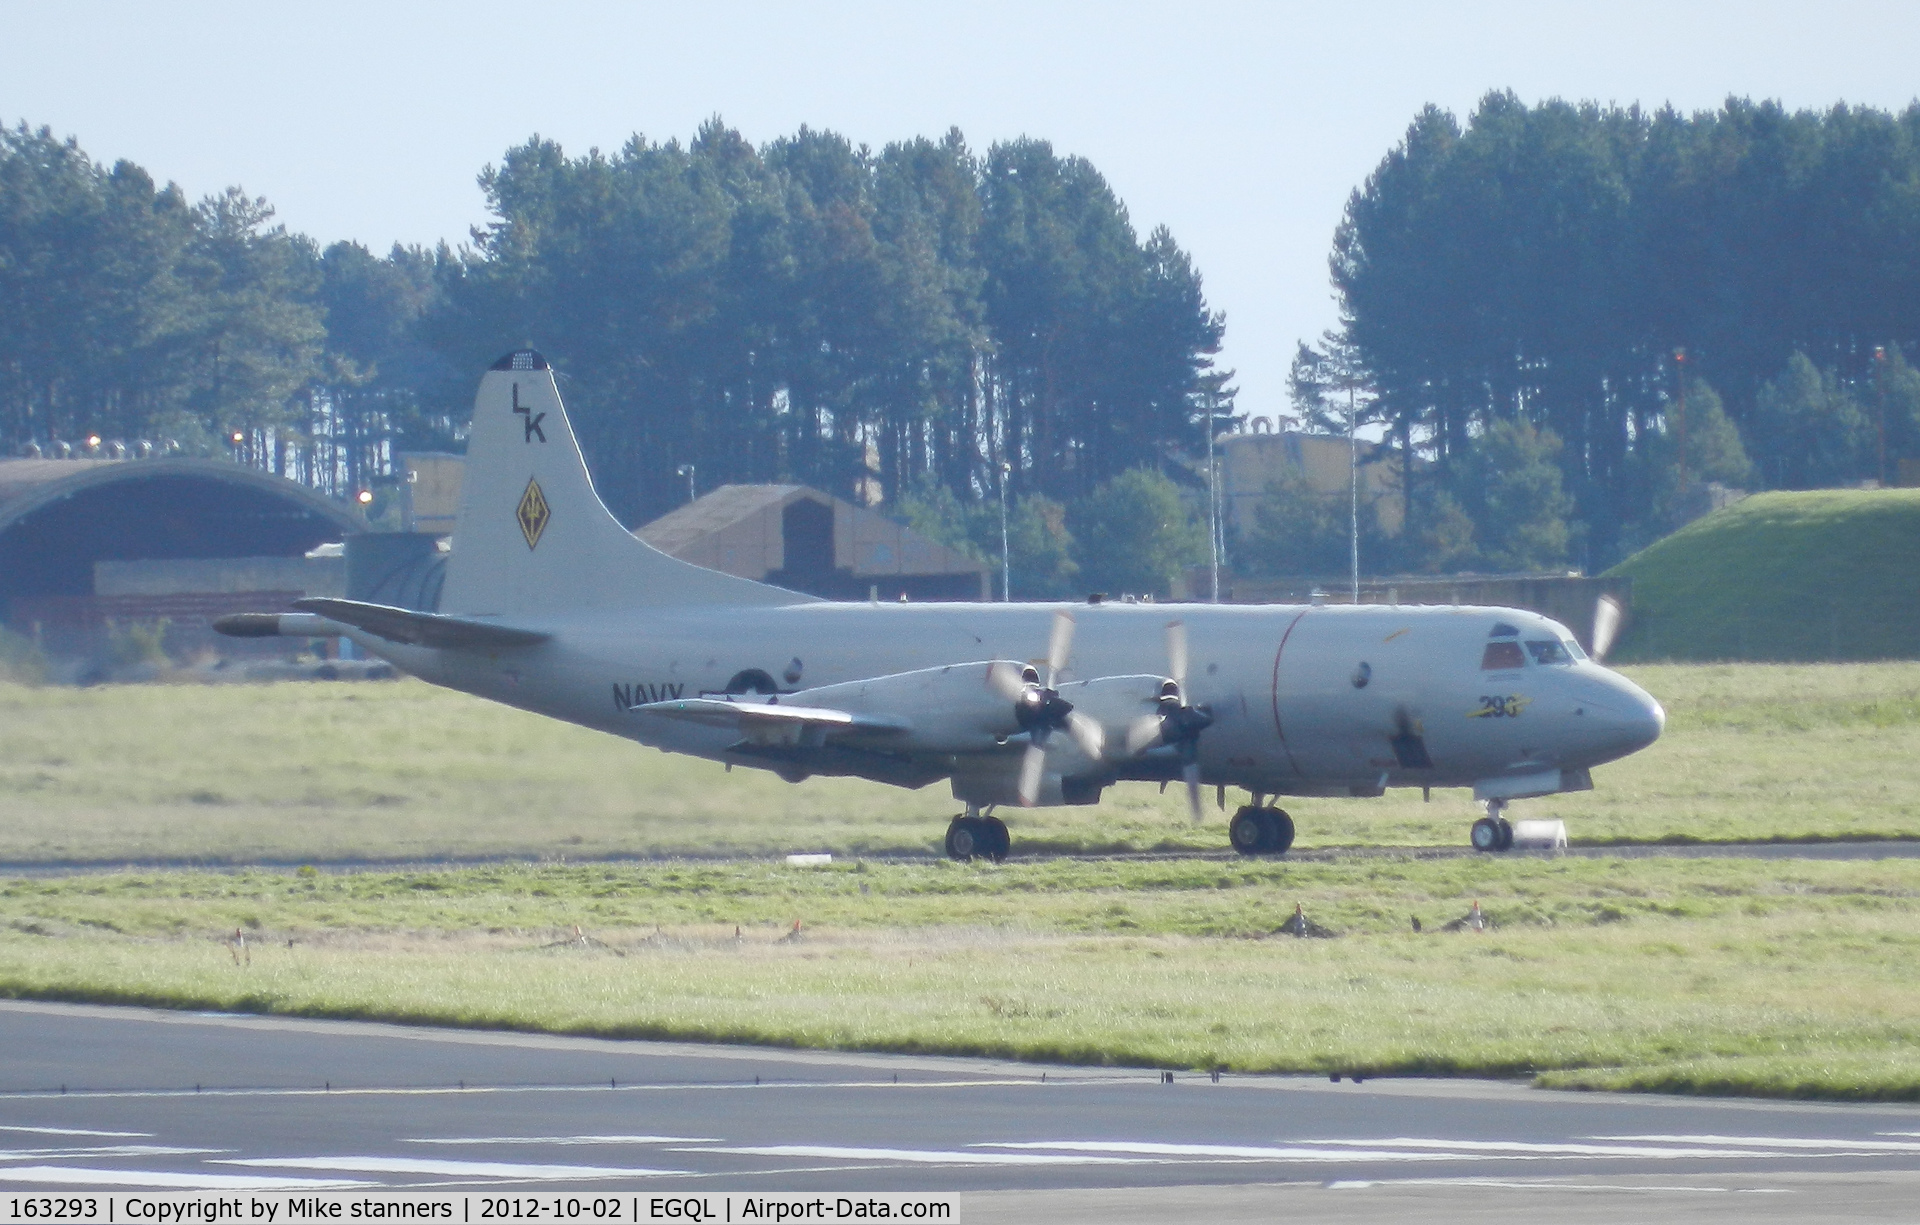 163293, 1989 Lockheed P-3C Orion C/N 285G-5822, VP-26 P-3C Orion taxiing to its dispersal after a joint warrior mission